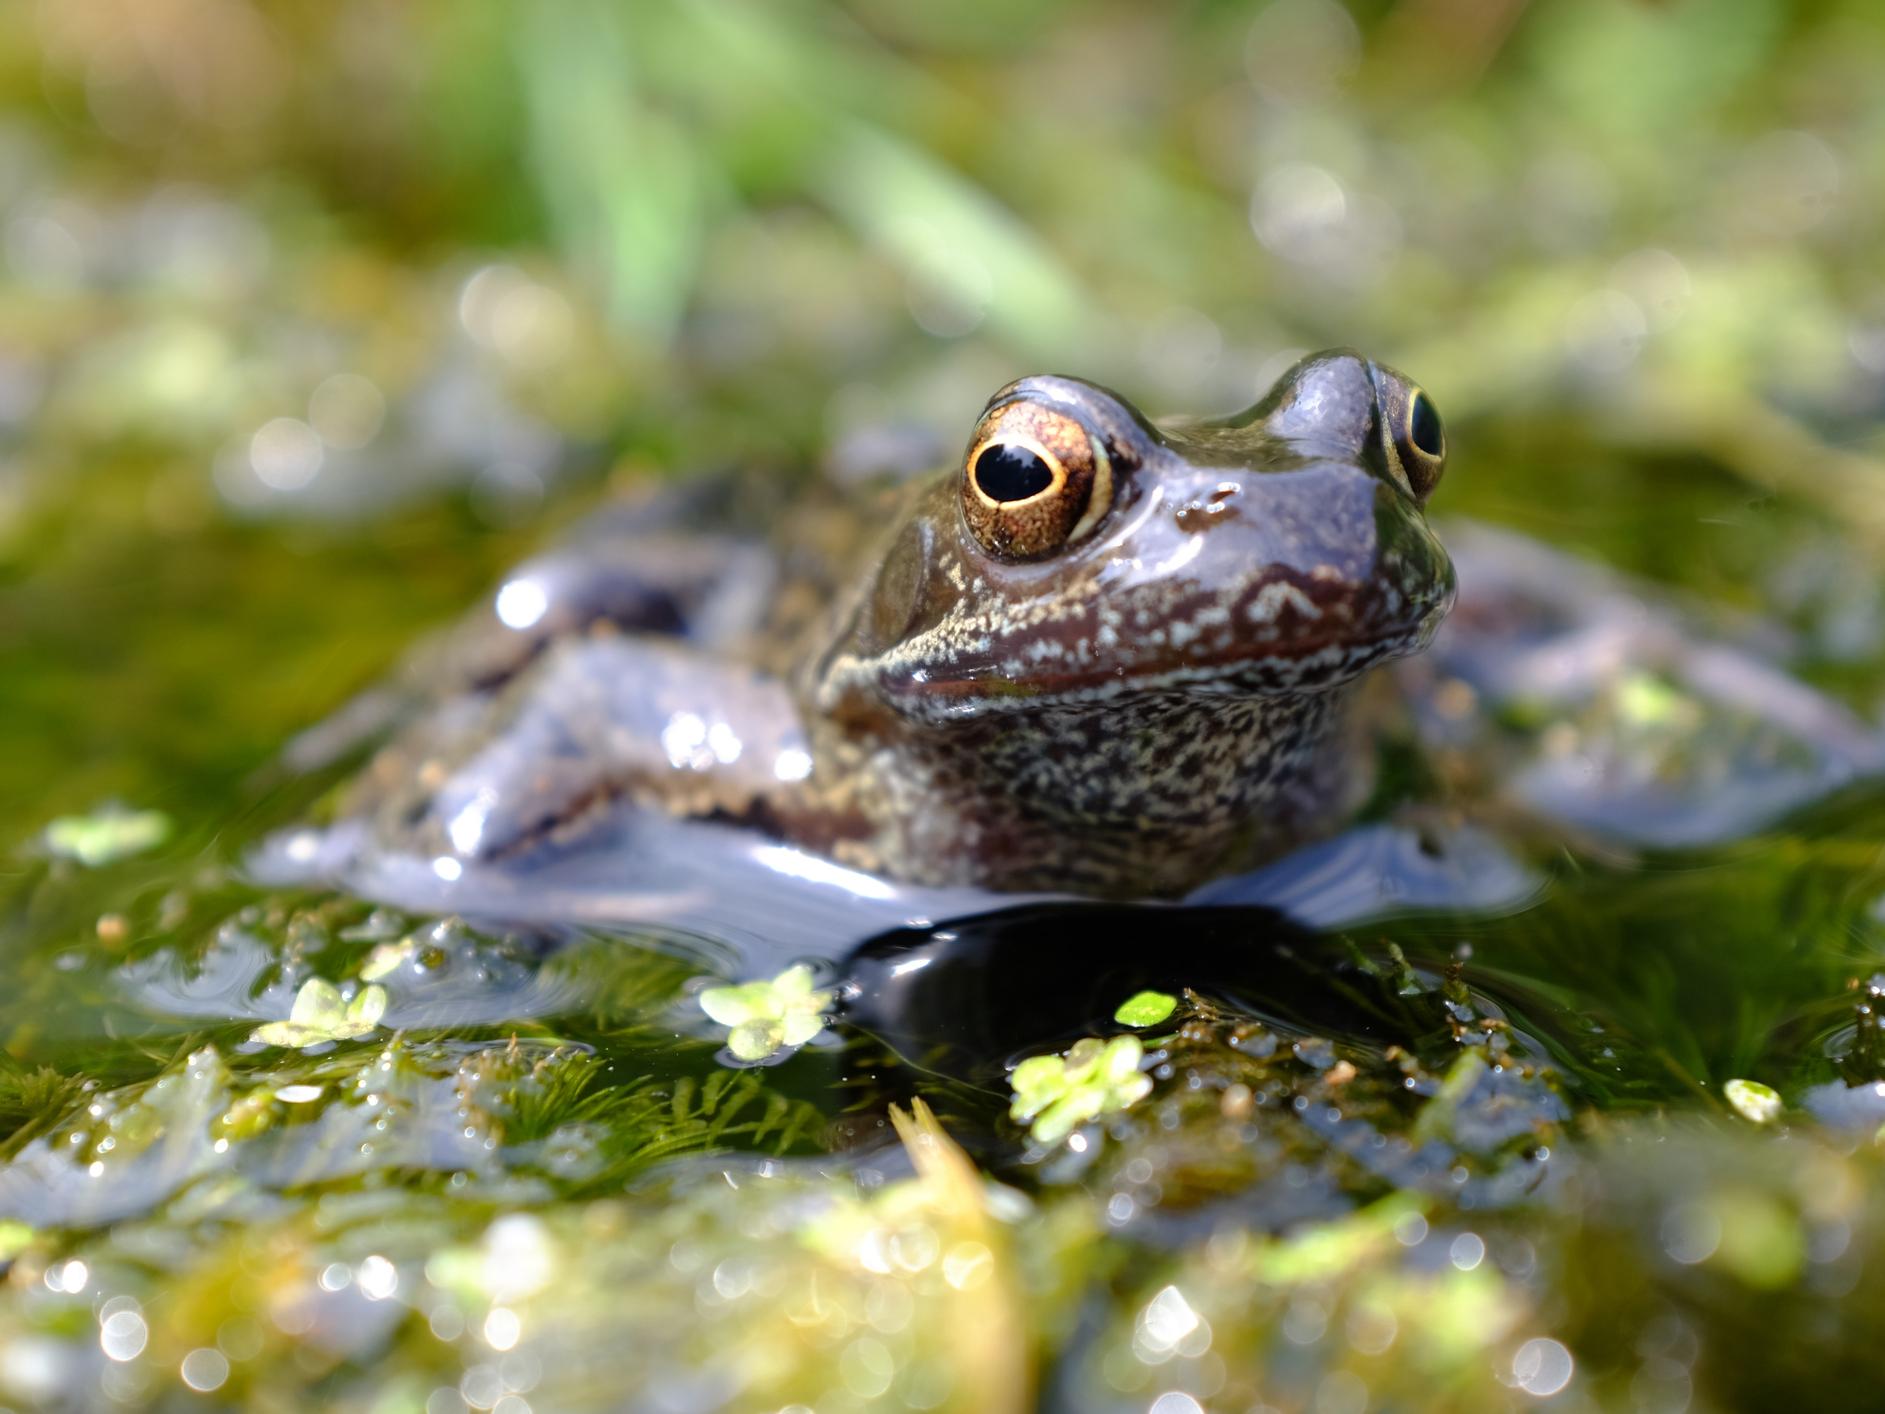 Amphibians such as this common frog could have their fertility impacted by the widespread use of pesticides that affect their hormones